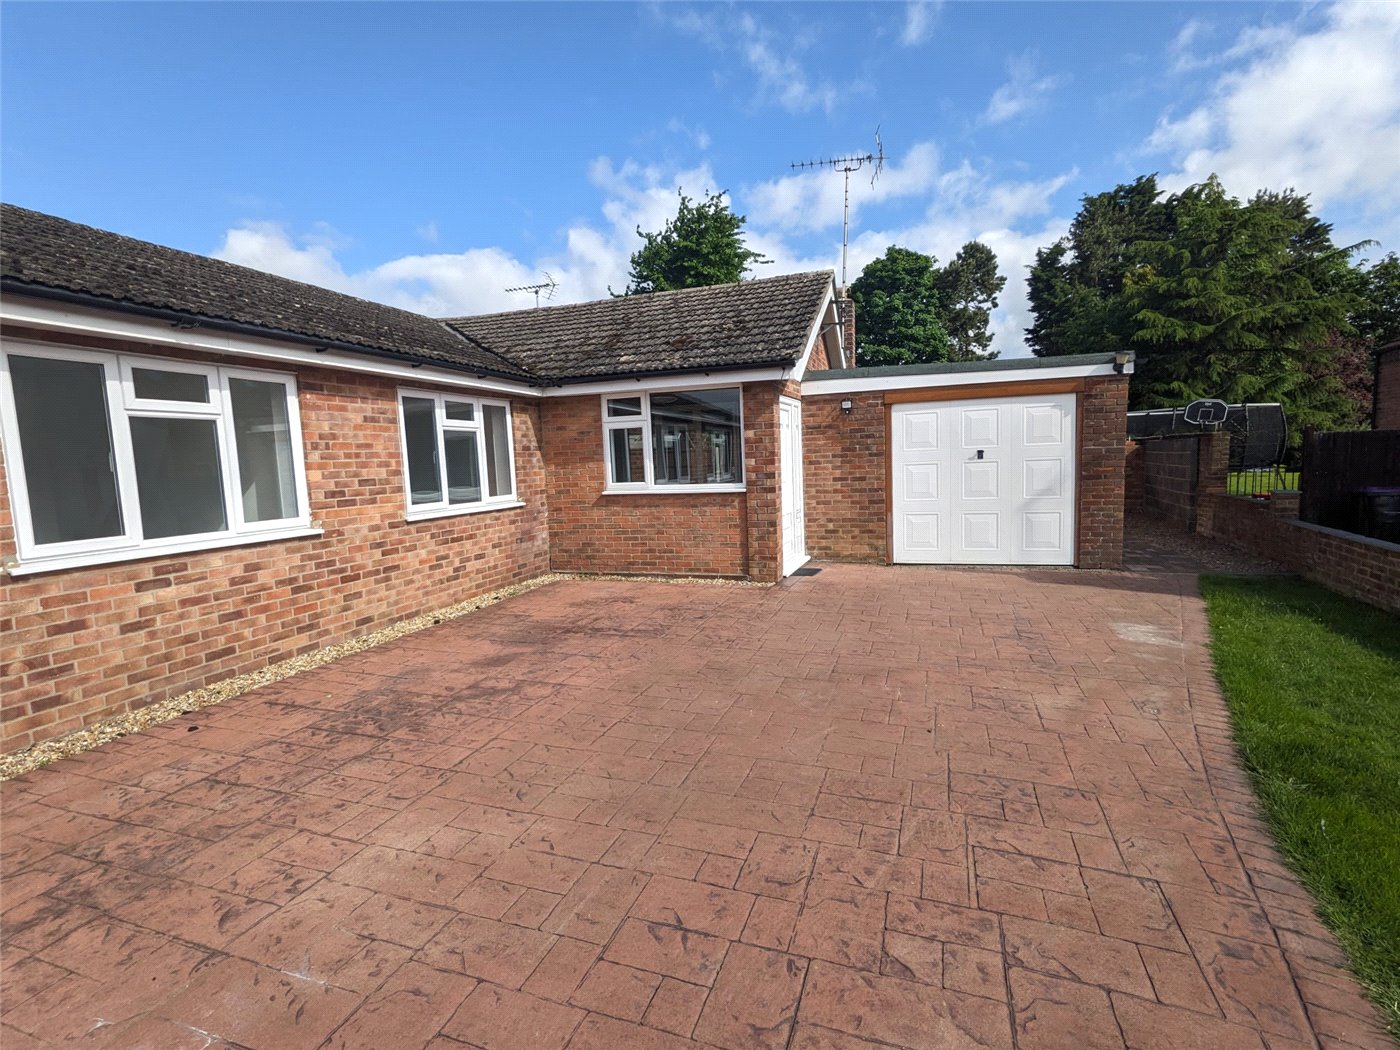 Fen Road, Pointon, Sleaford, Lincolnshire, NG34